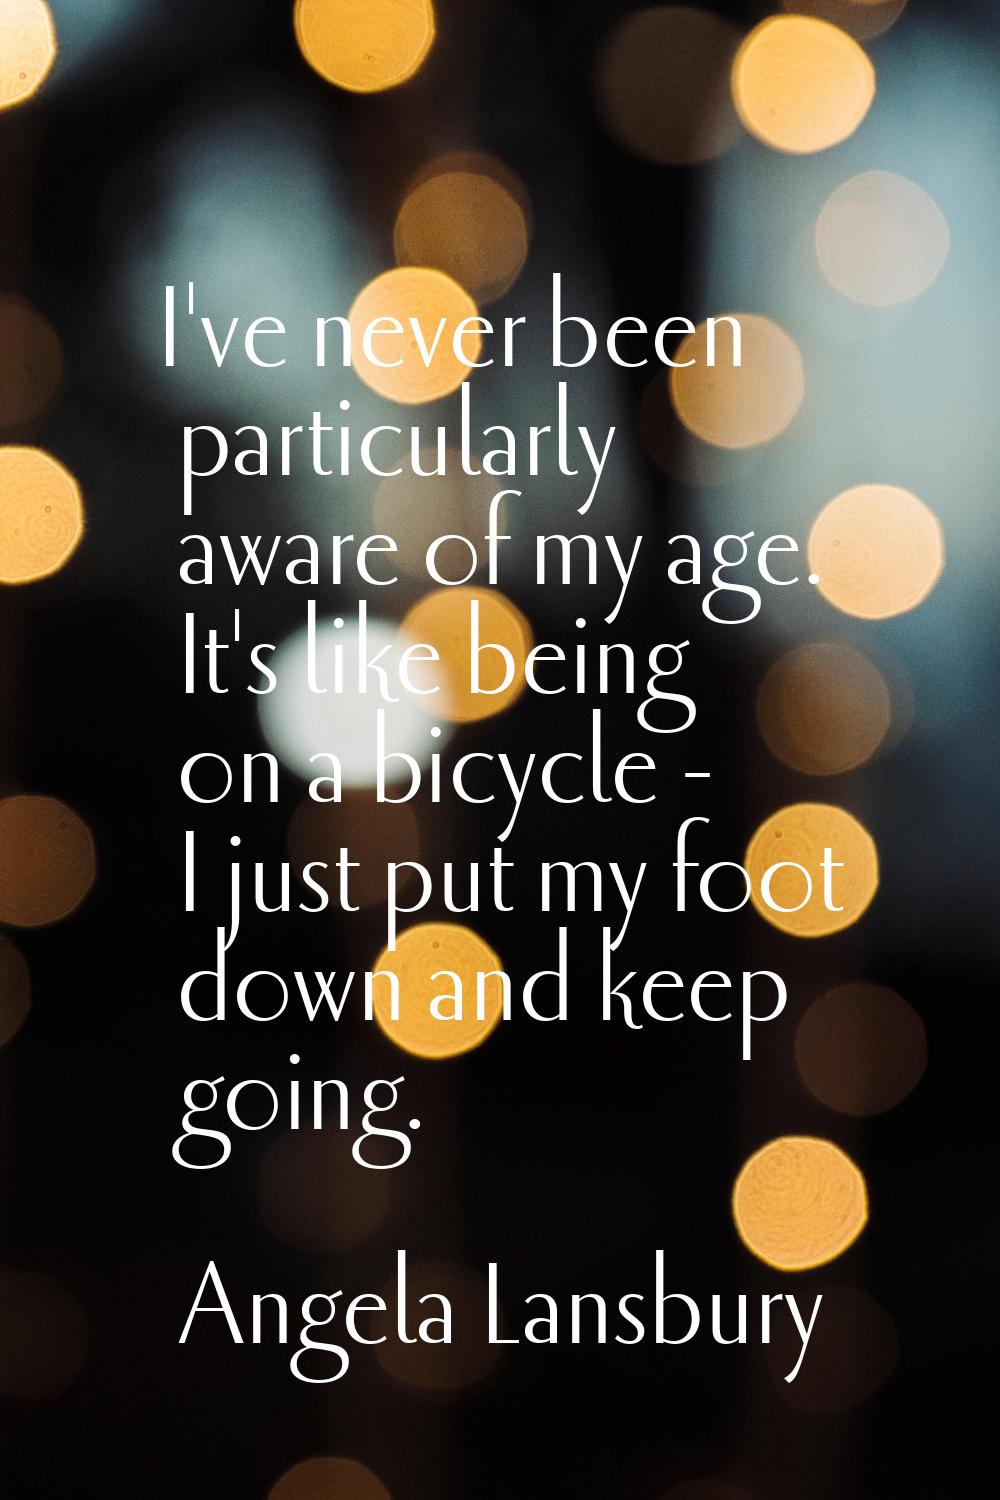 I've never been particularly aware of my age. It's like being on a bicycle - I just put my foot dow